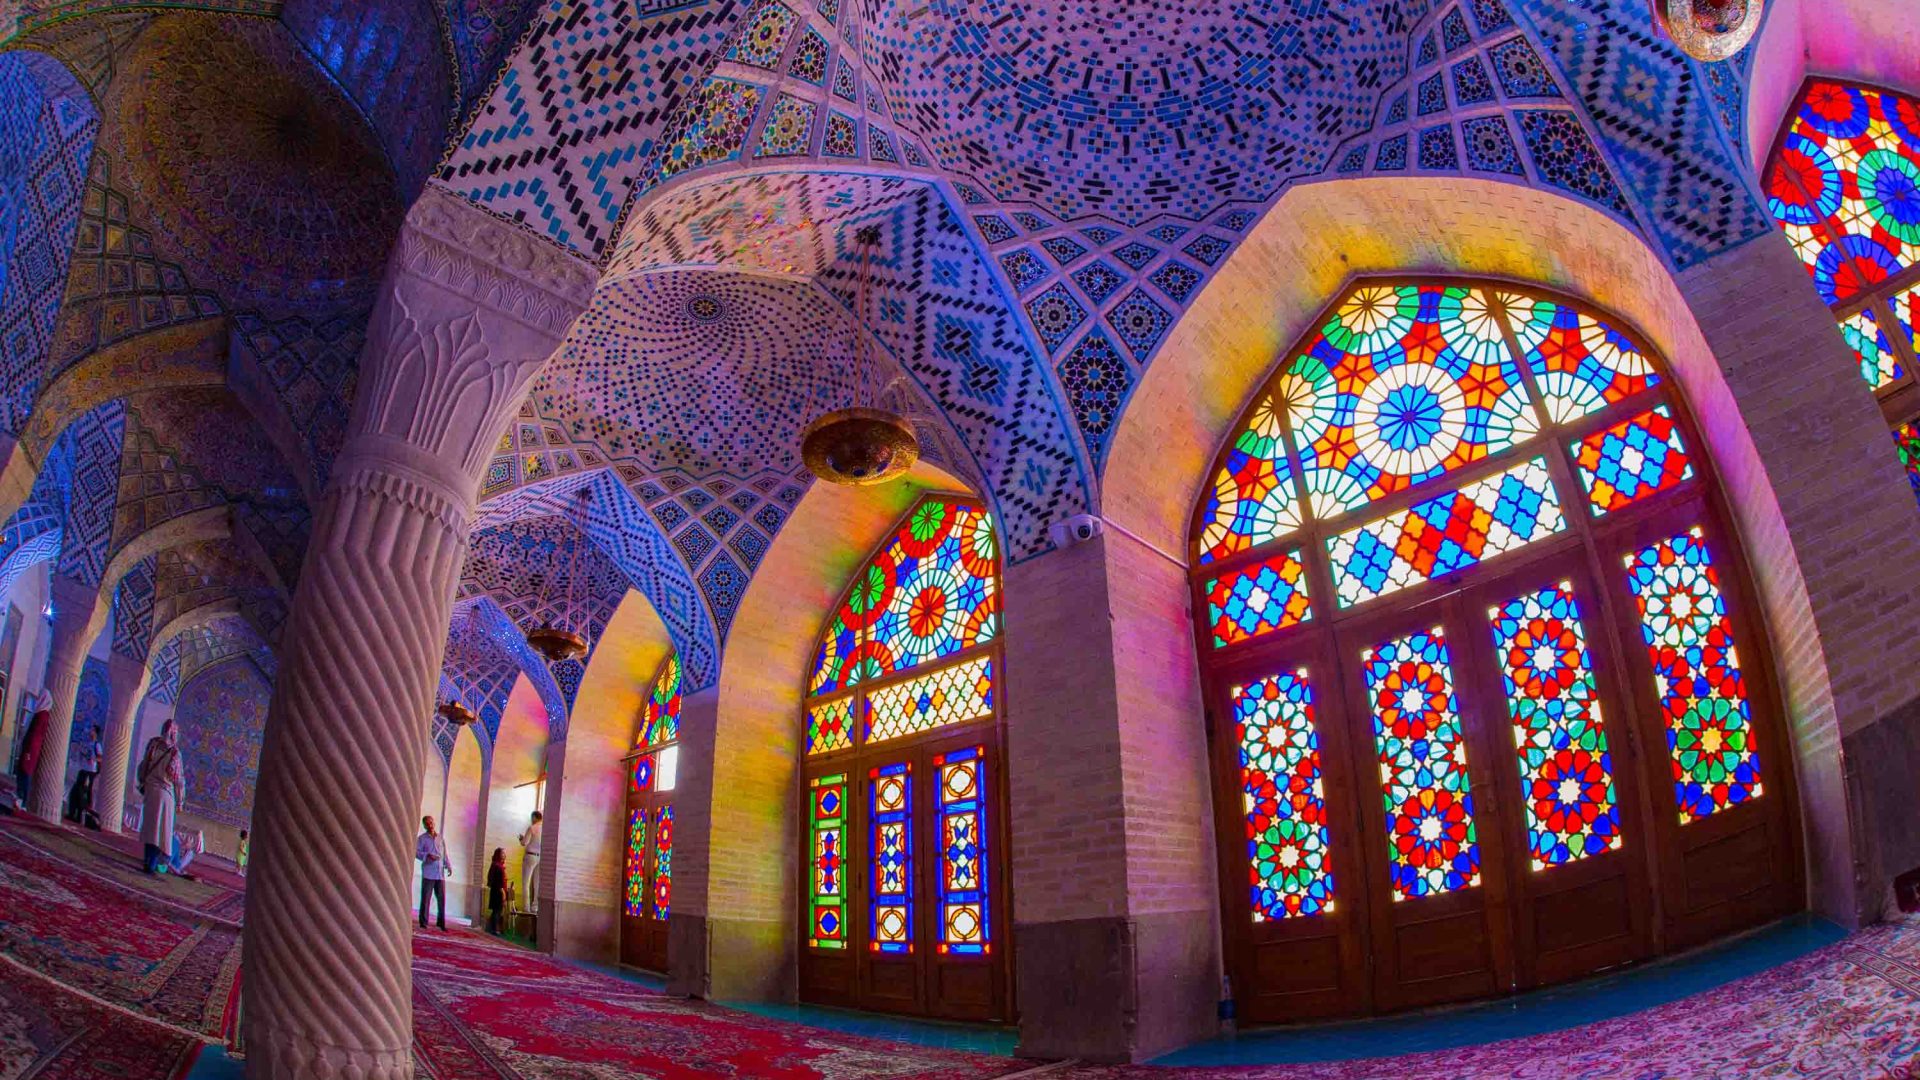 The colorful stained glass windows of a mosque.